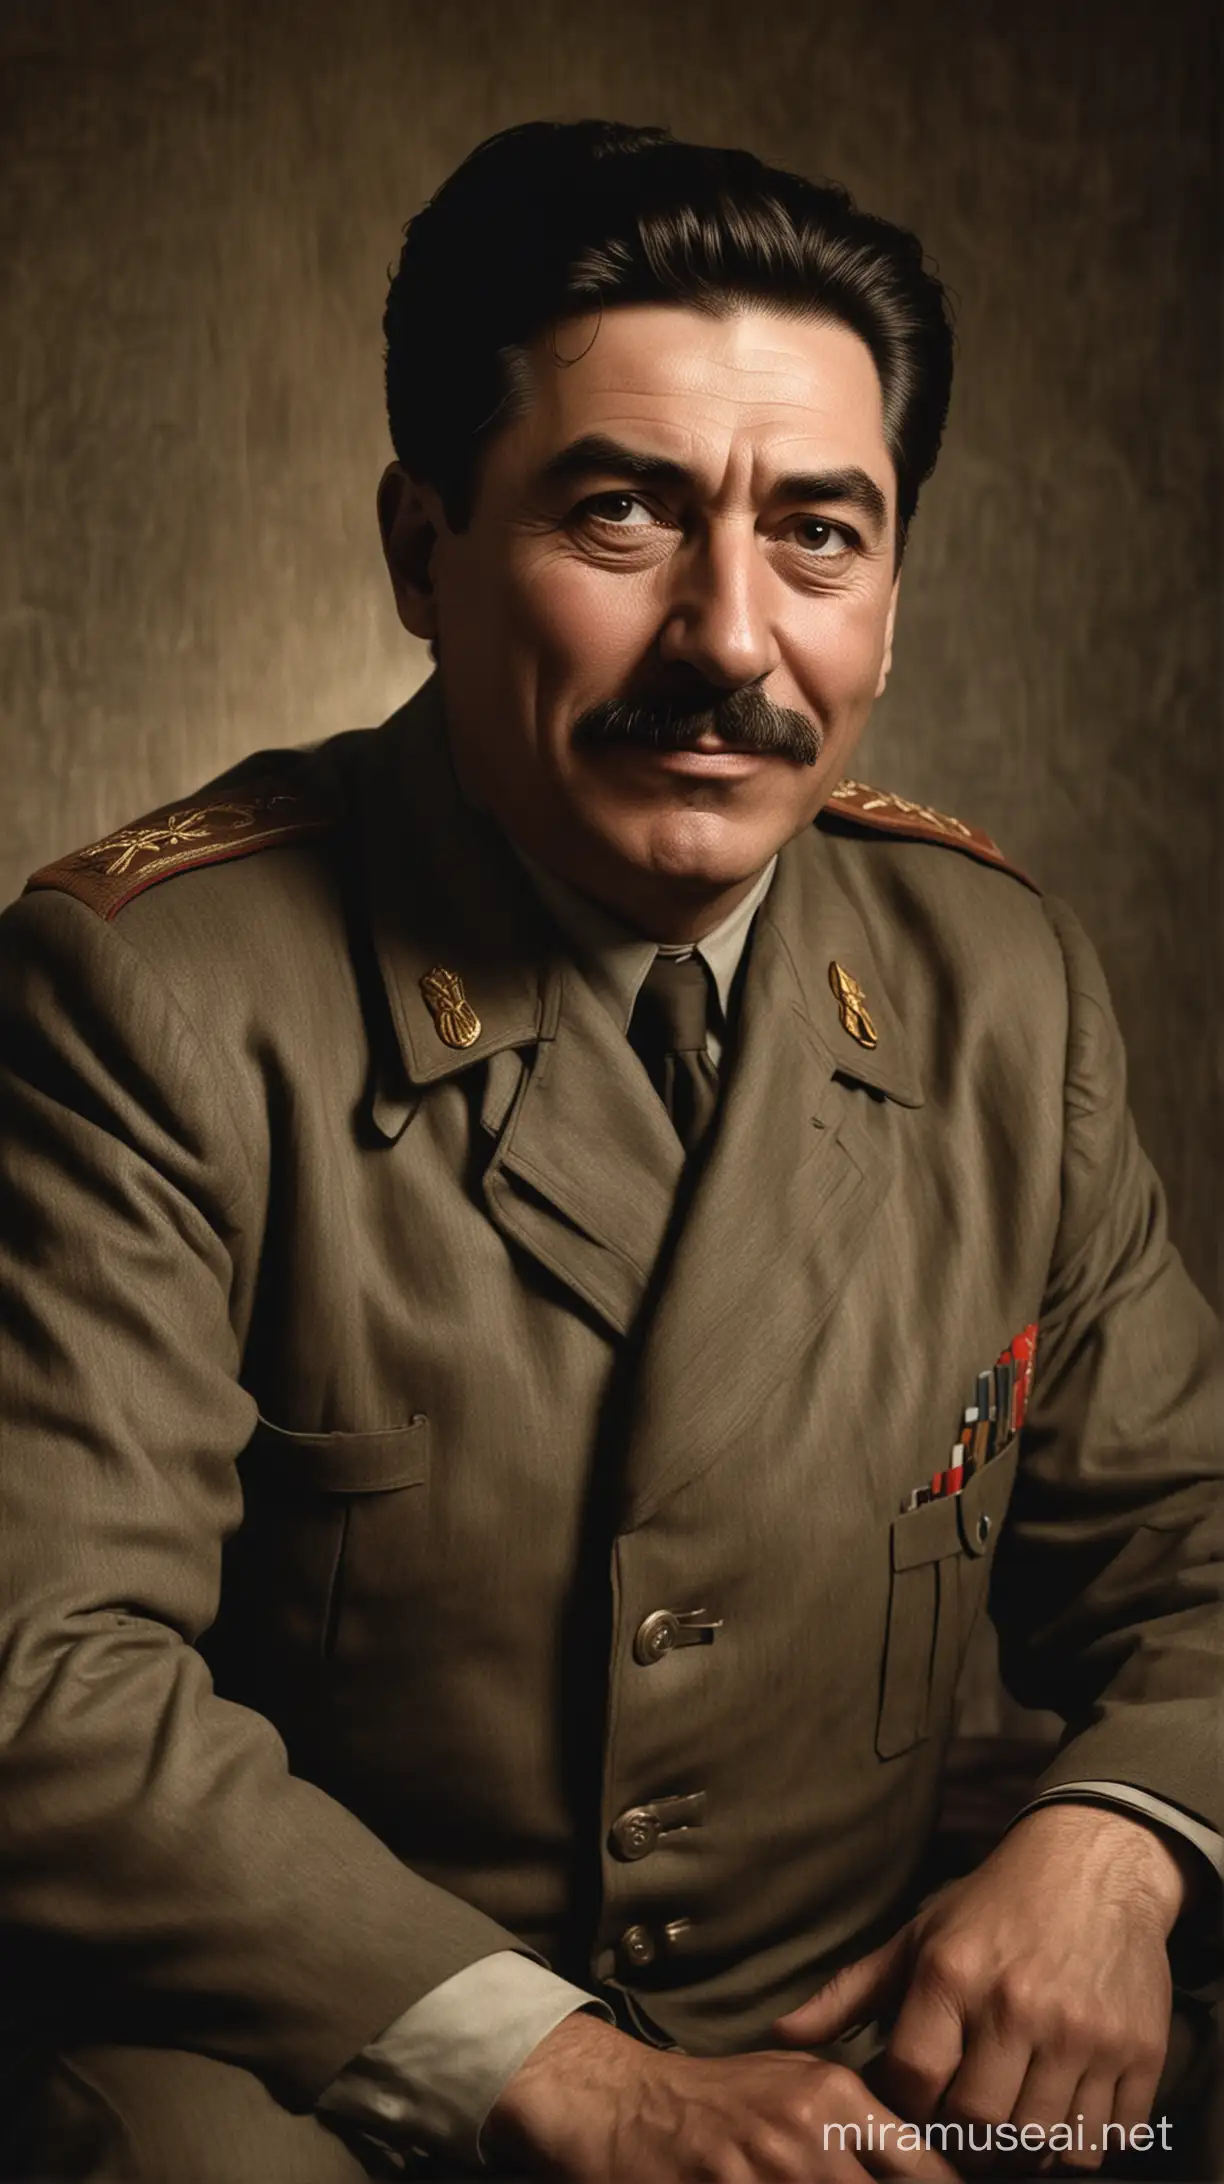 Create an image of Joseph Stalin sitting in a darkened room, watching a Charlie Chaplin movie with a big smile on his face. Hyper realistic